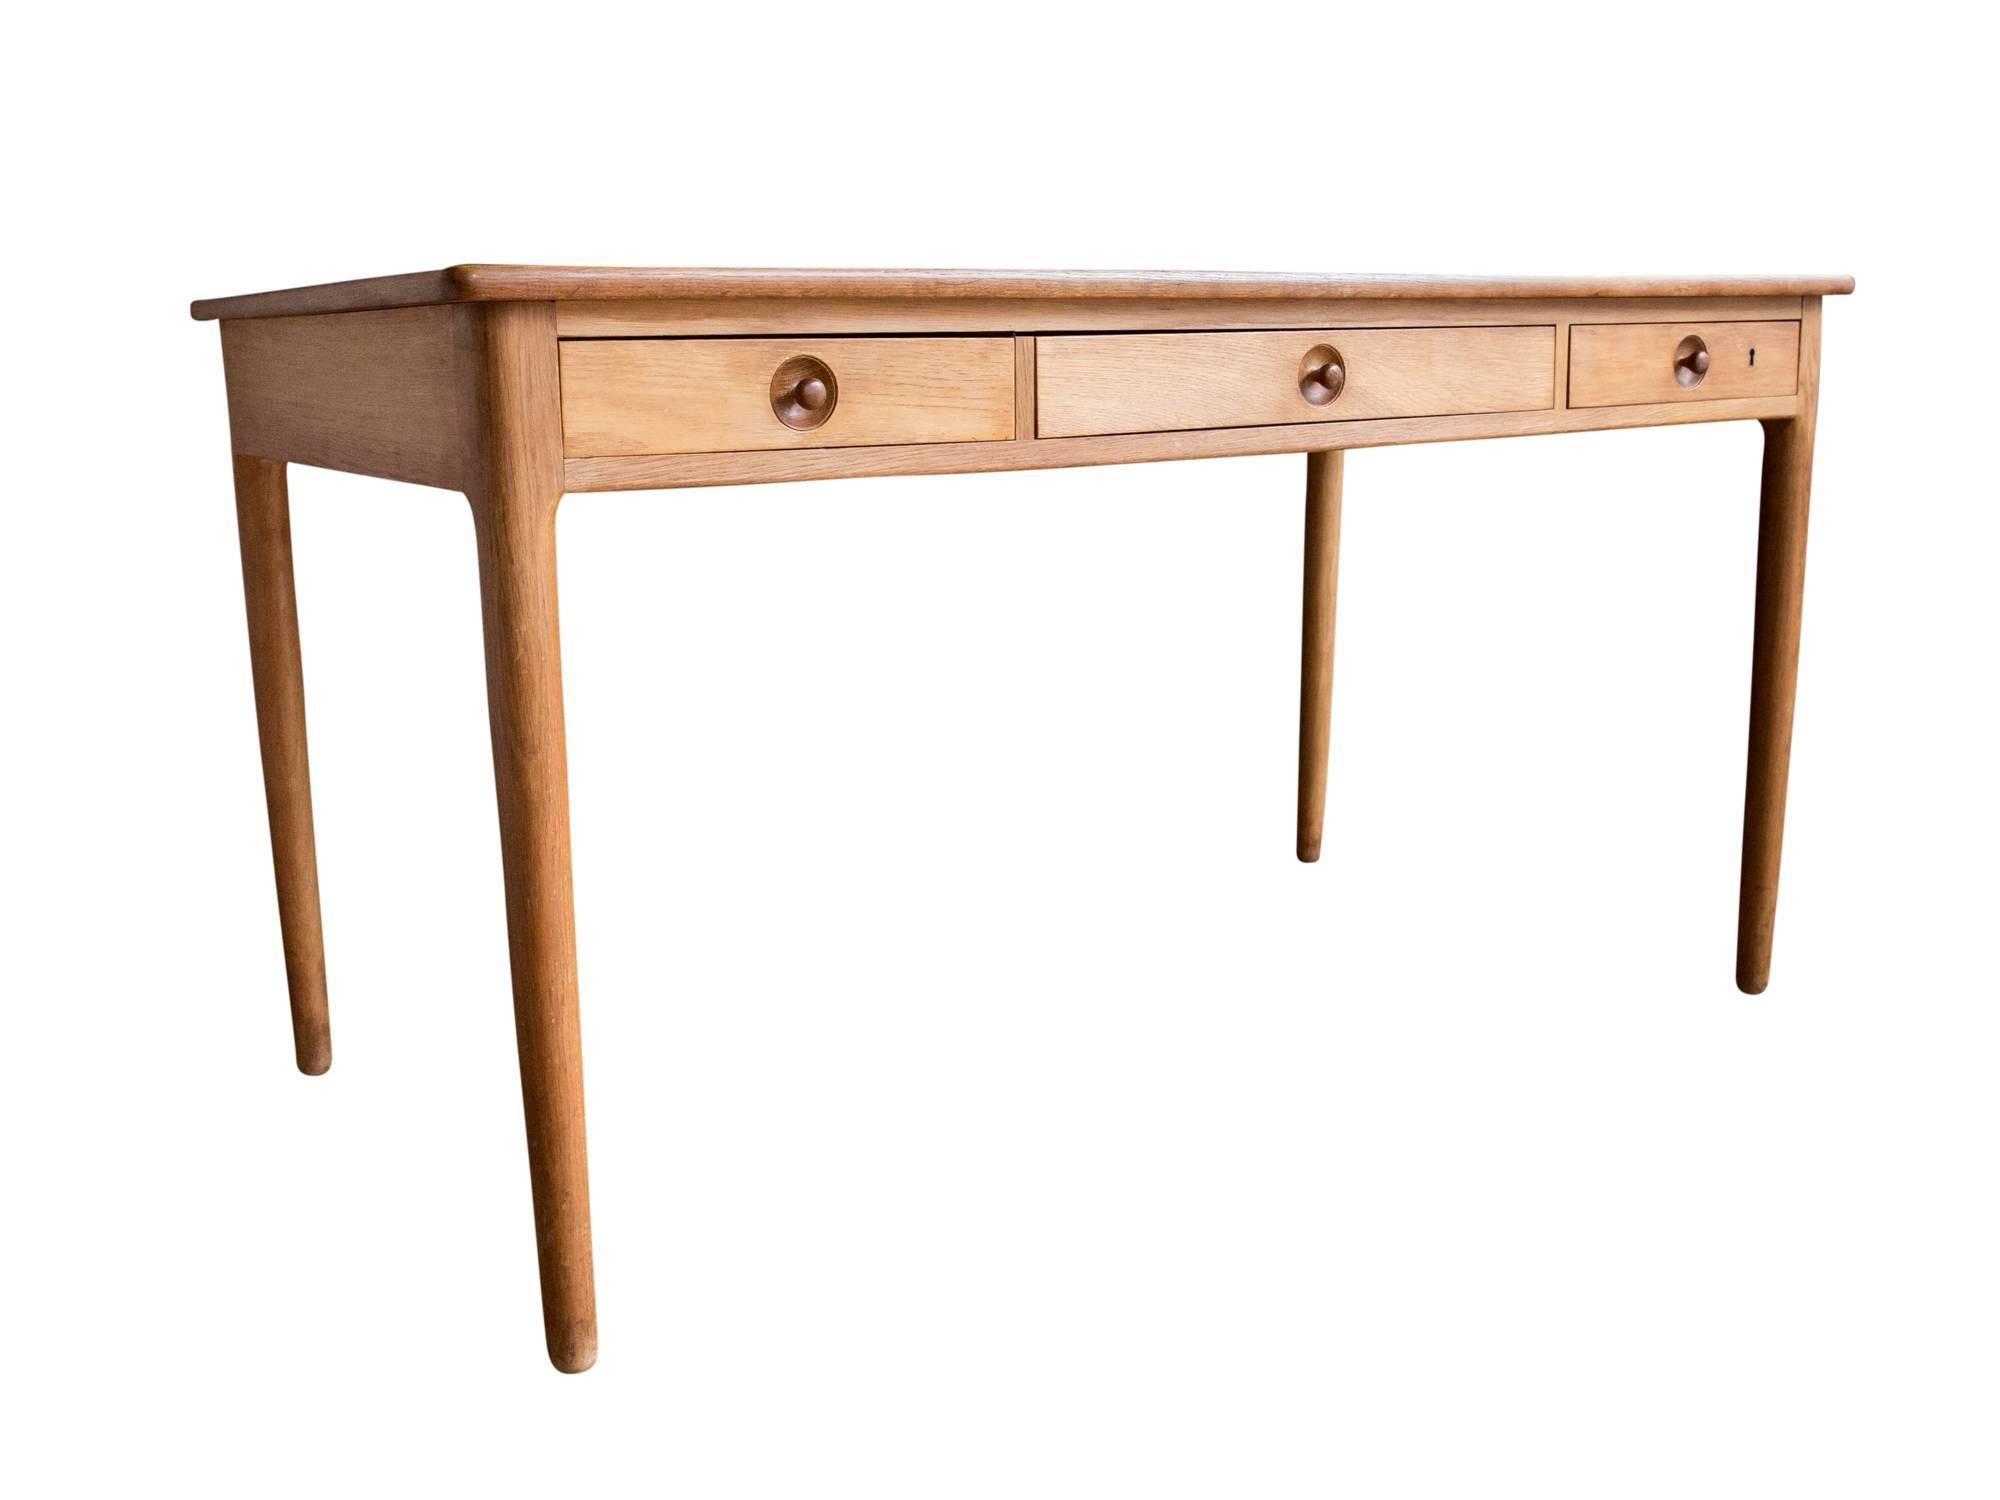 A model AT 305 writing desk designed by Hans J. Wegner for Andreas Tuck, circa 1950s or 1960s. Featuring a large rectangular oak top supported by slightly tapered cylindrical oak legs. Three storage drawers finished with recessed turned knobs. Built